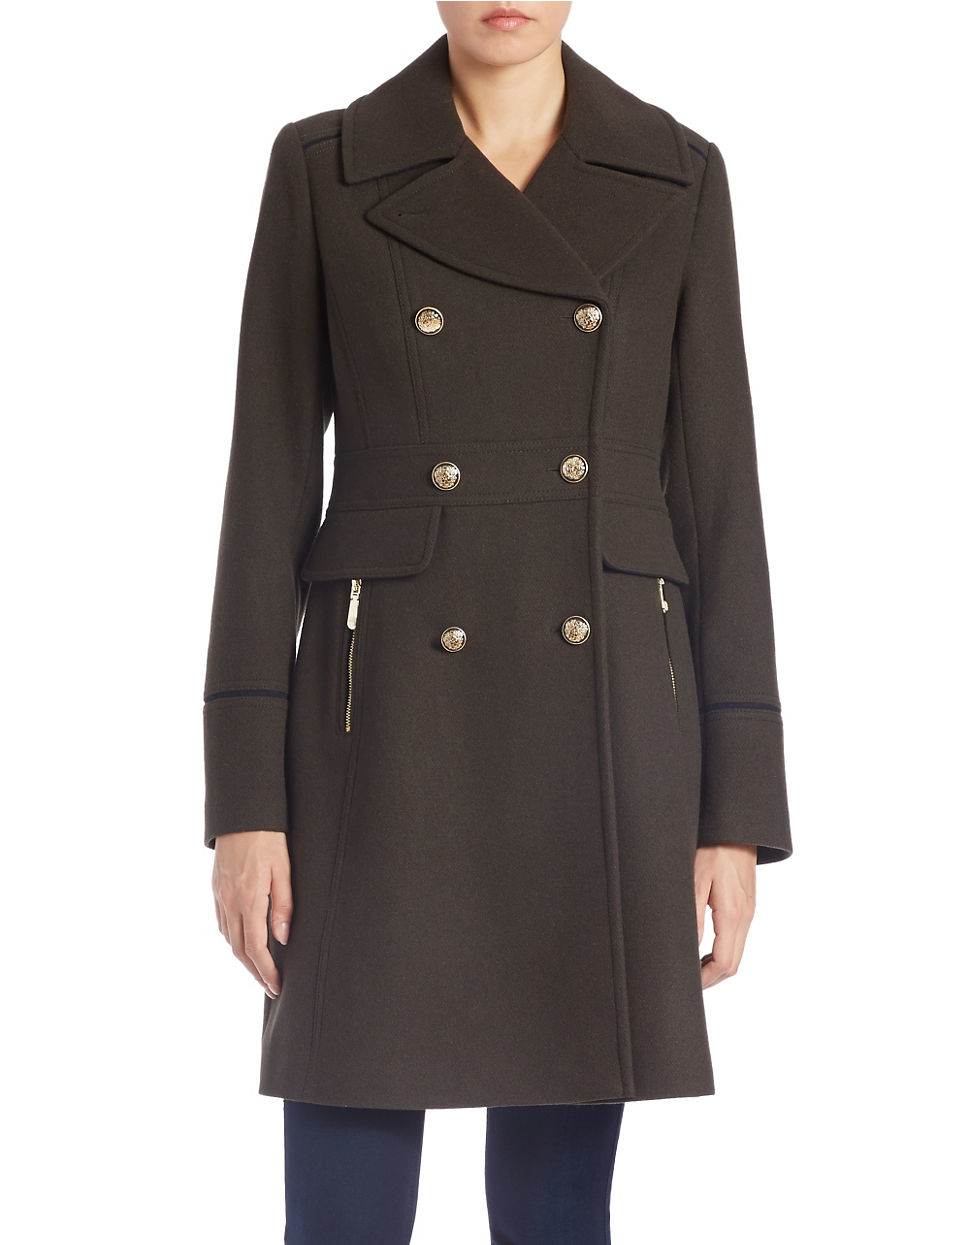 Lyst - Vince Camuto Double-breasted Military Walker Coat in Green